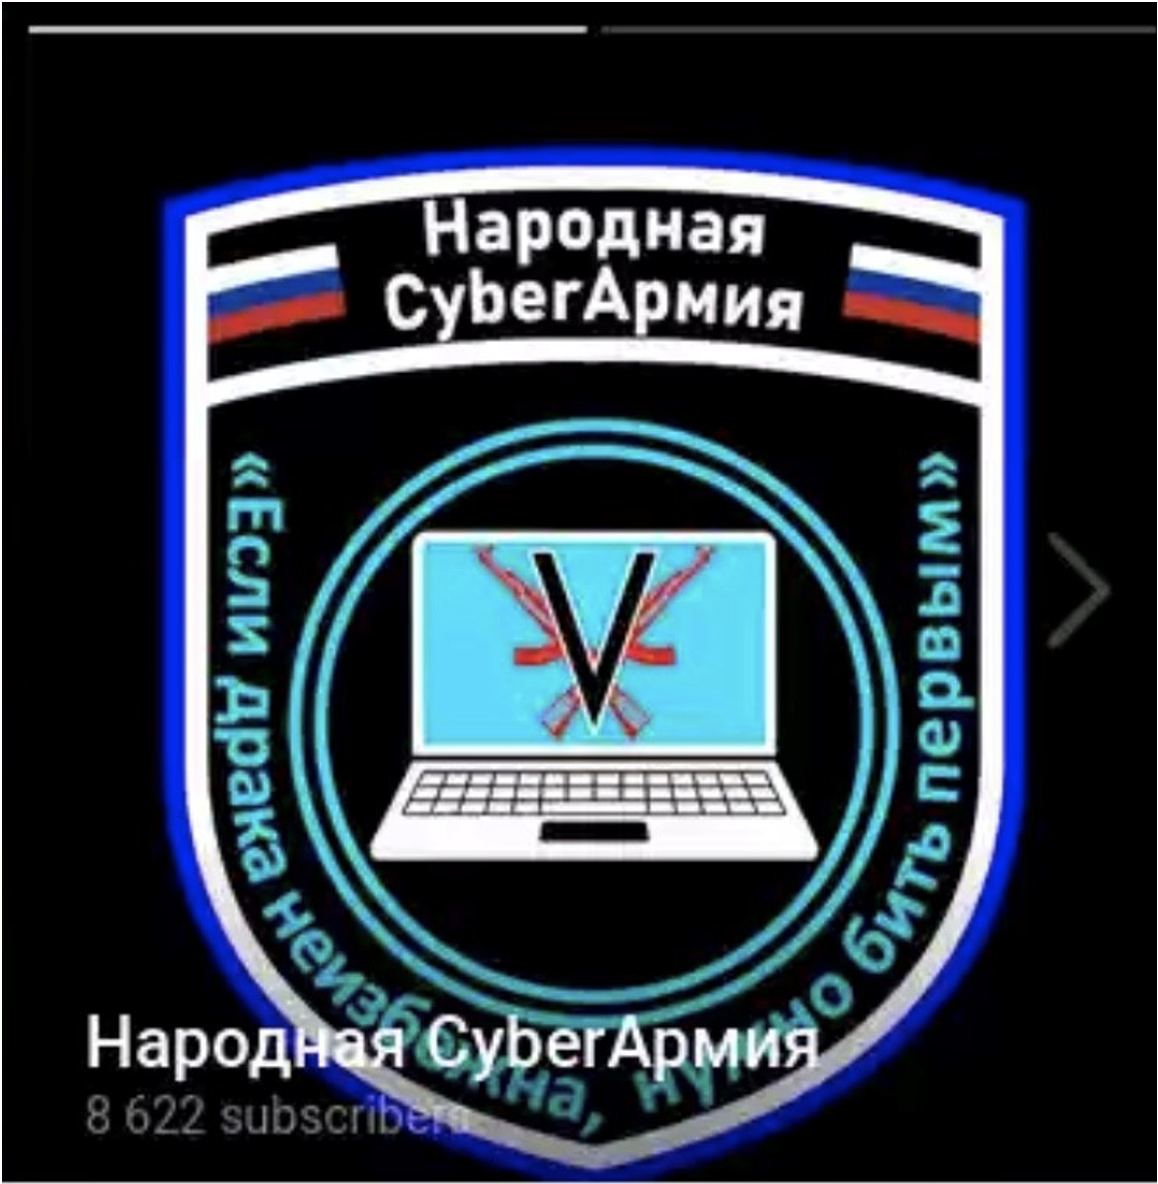 New logo for the CyberArmyofRussia_Reborn, the text of which reads “People’s Cyber Army” with a quote notably used by Russia’s President Putin “If a fight is inevitable, you must strike first”